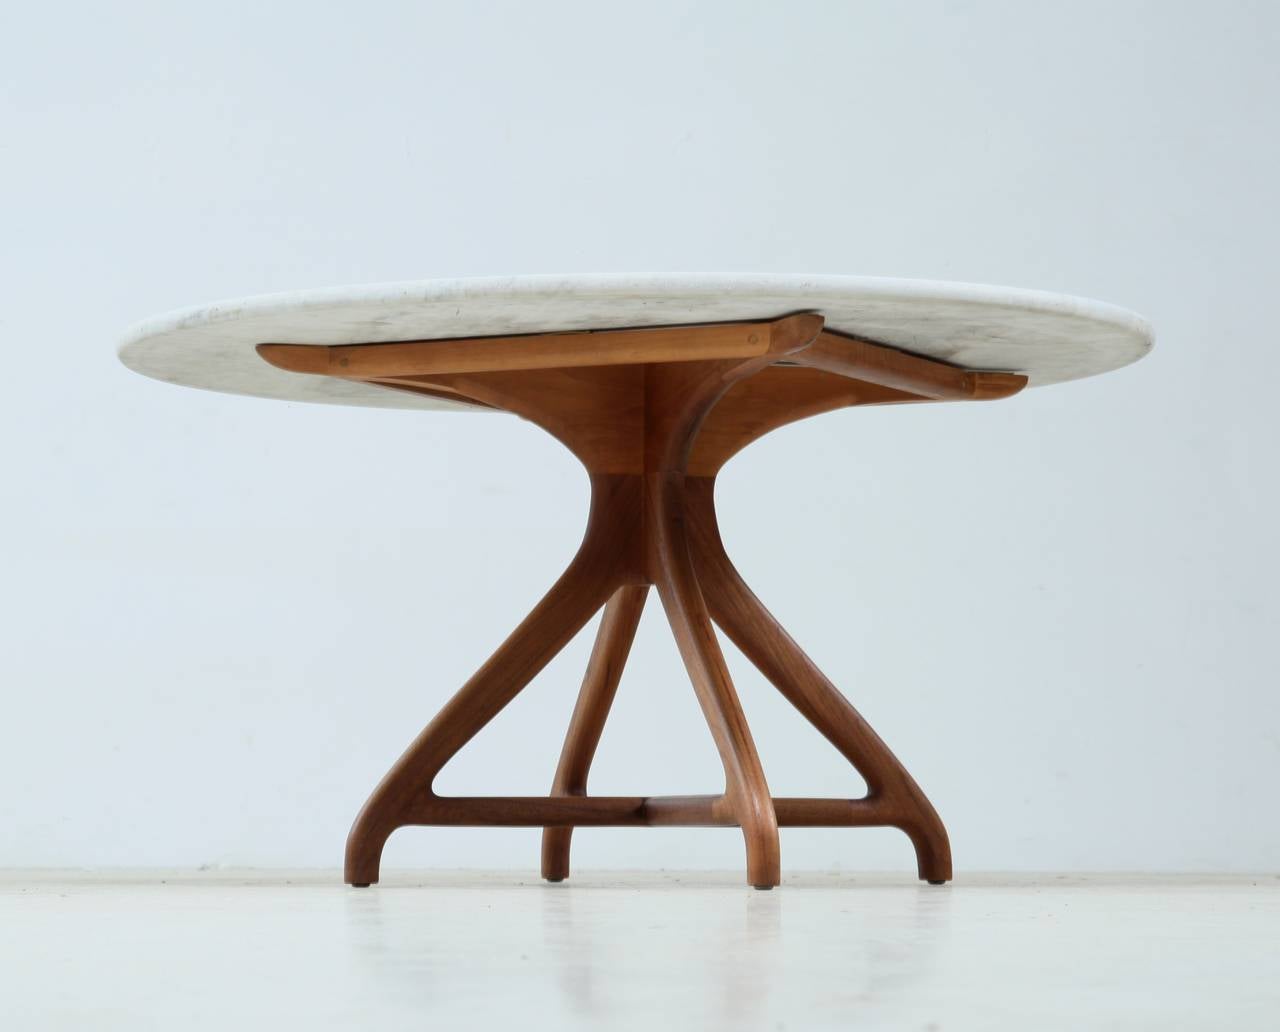 A custom handmade Richard Harrison table made of a sculptural walnut base with a round marble top.

Matching chairs also available.